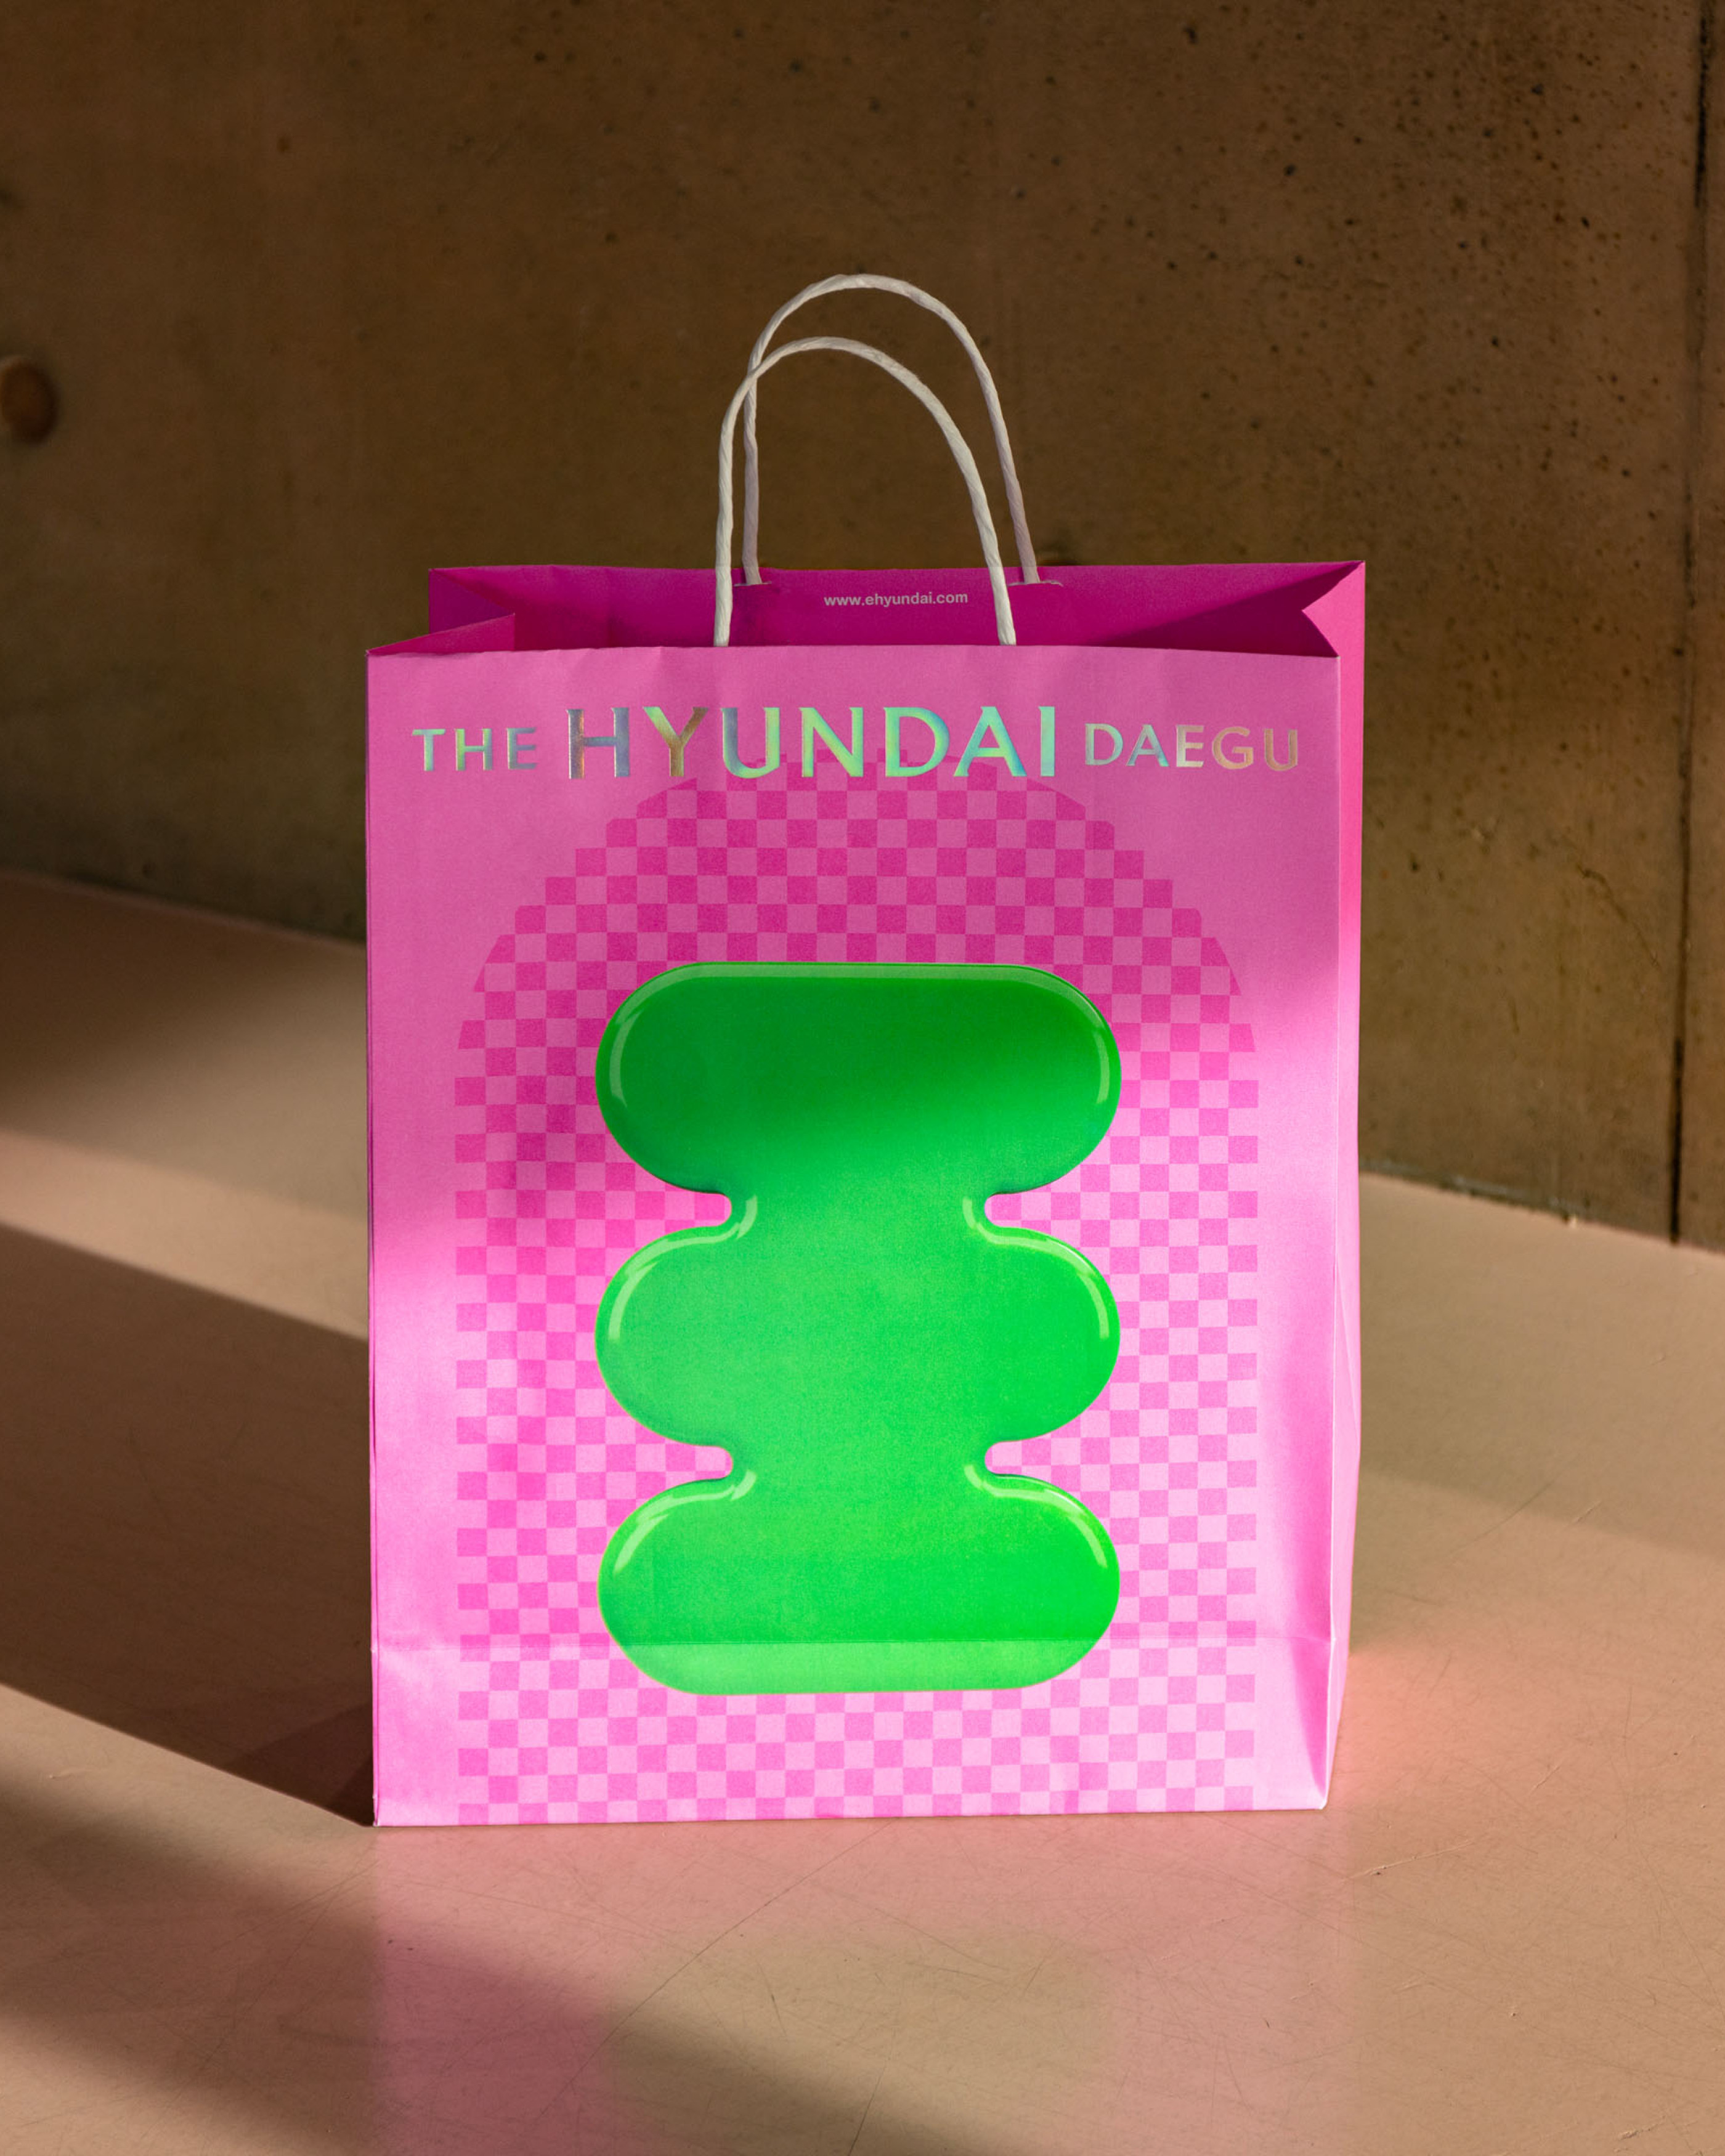 Shopping bag design as part of a campaign for the Hyundai Department Store in Daegu.